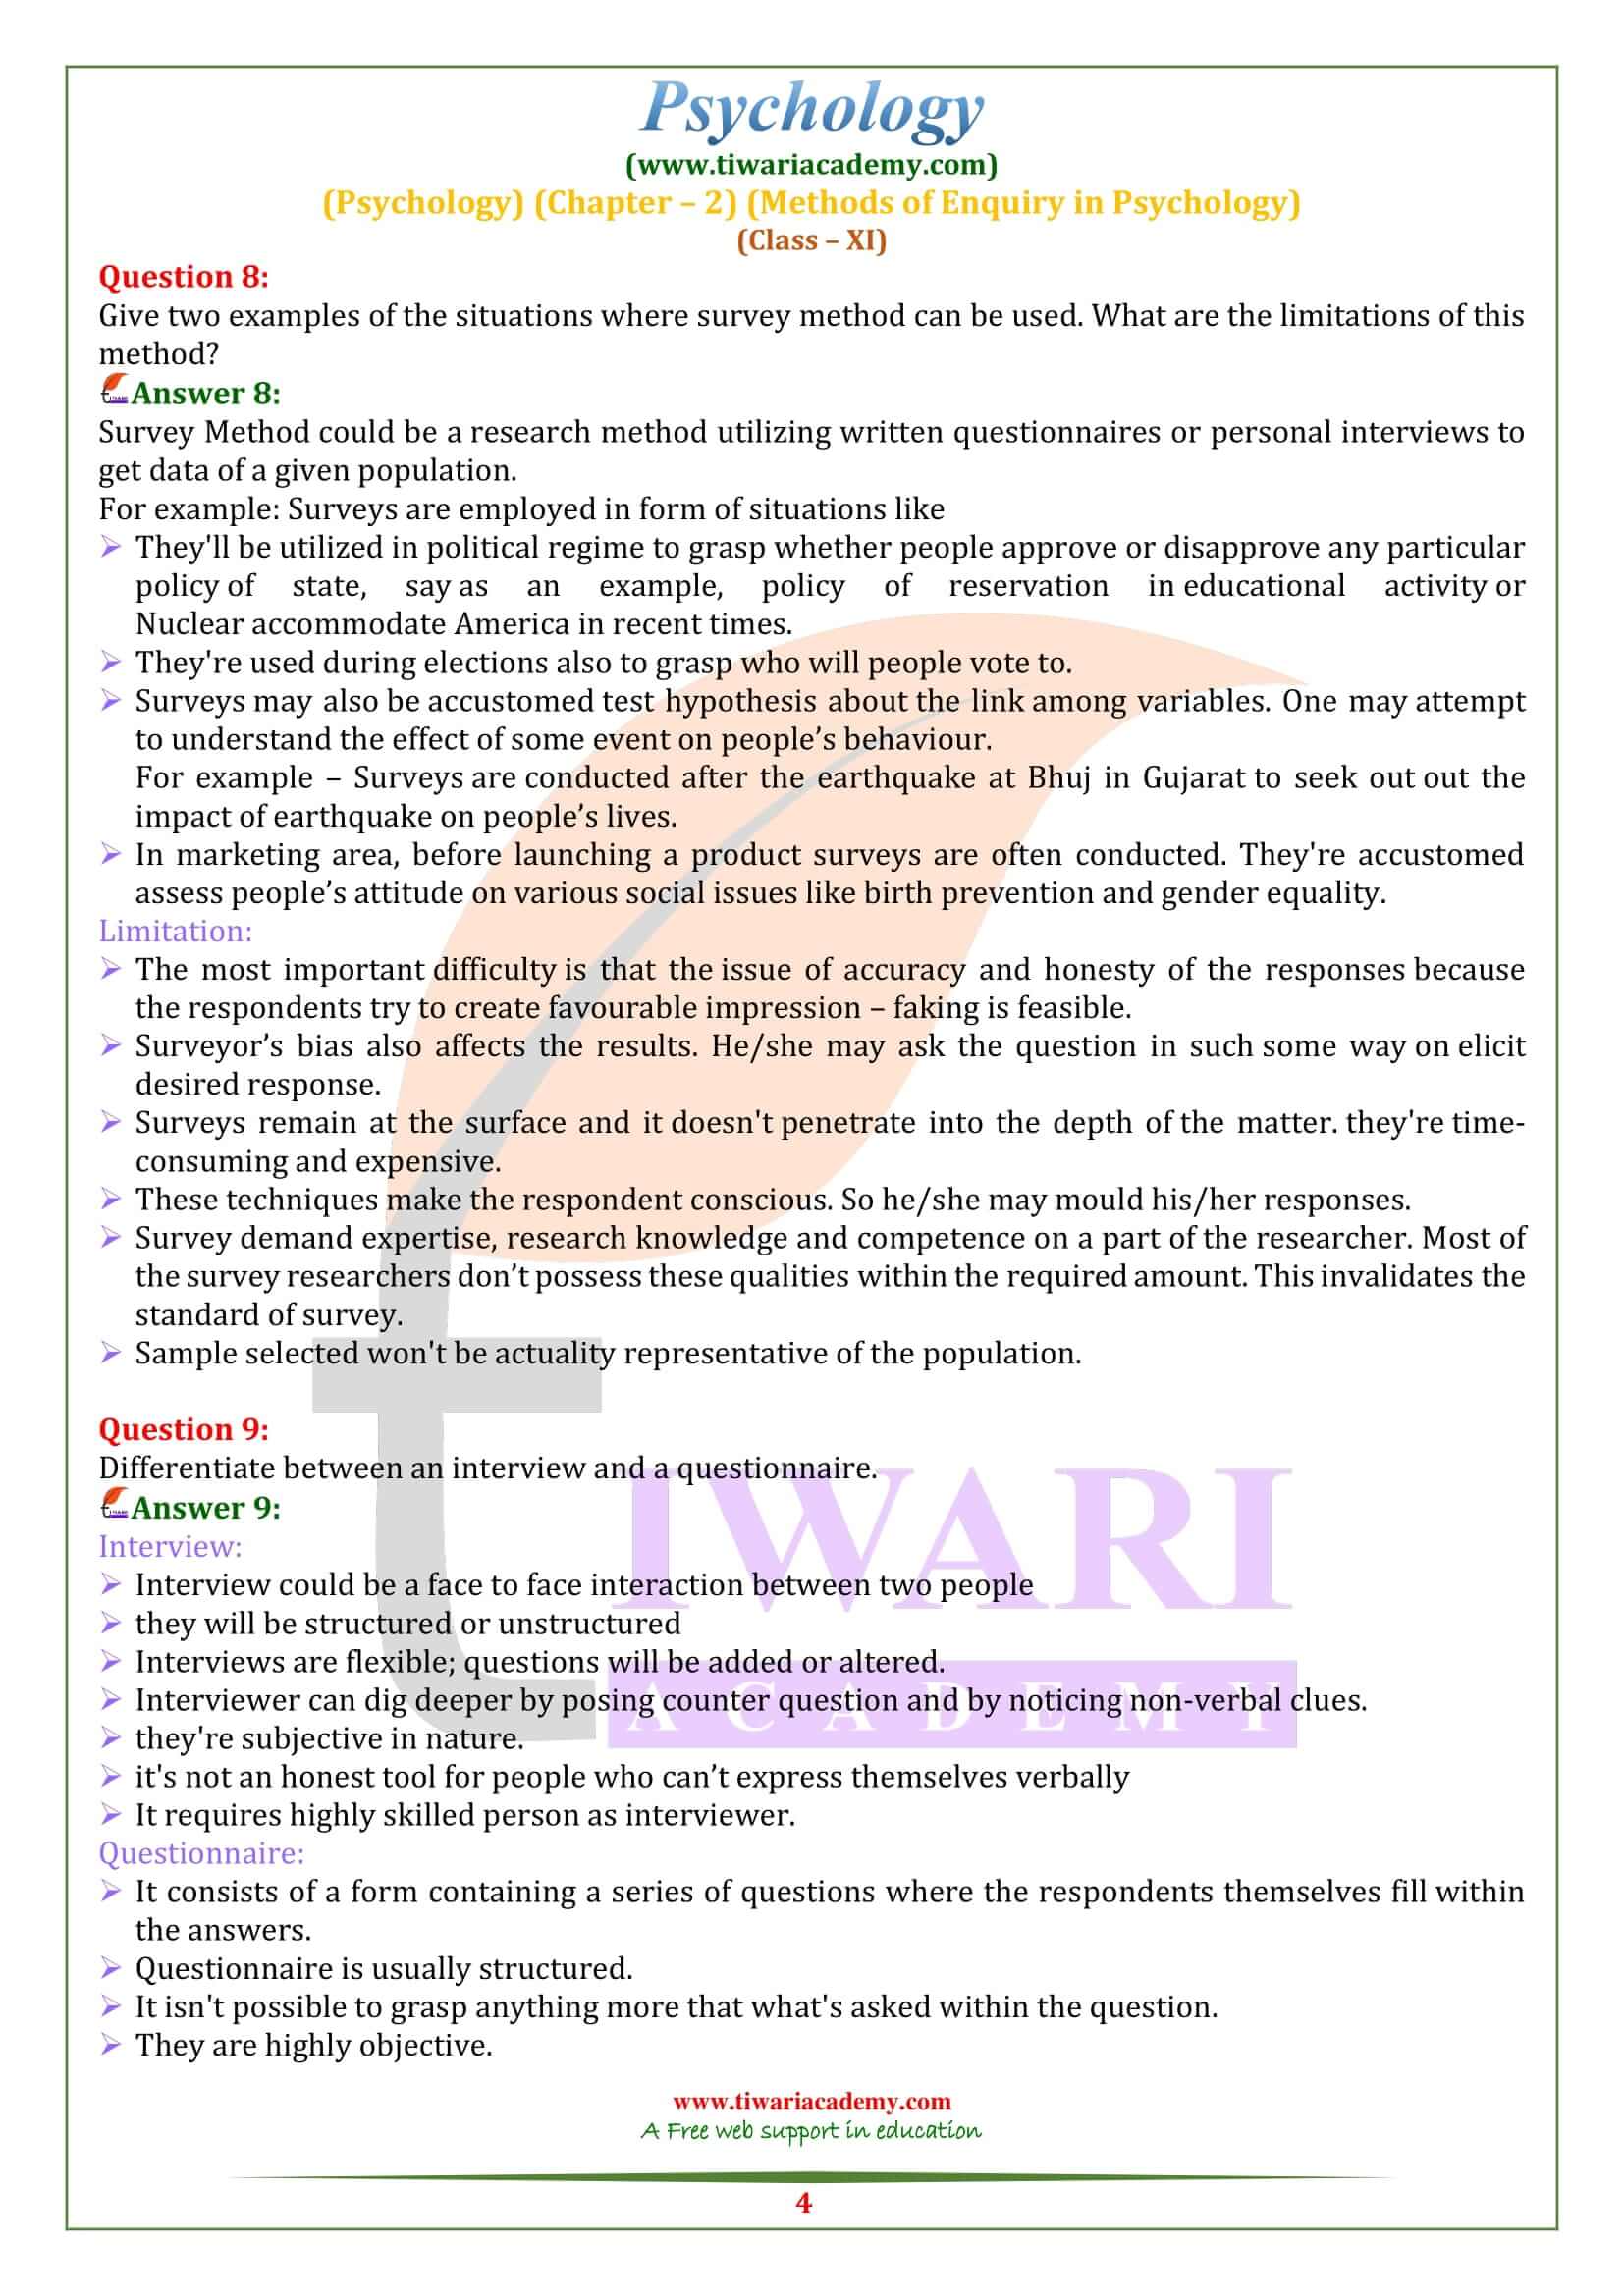 NCERT Solutions for Class 11 Psychology Chapter 2 in English Medium